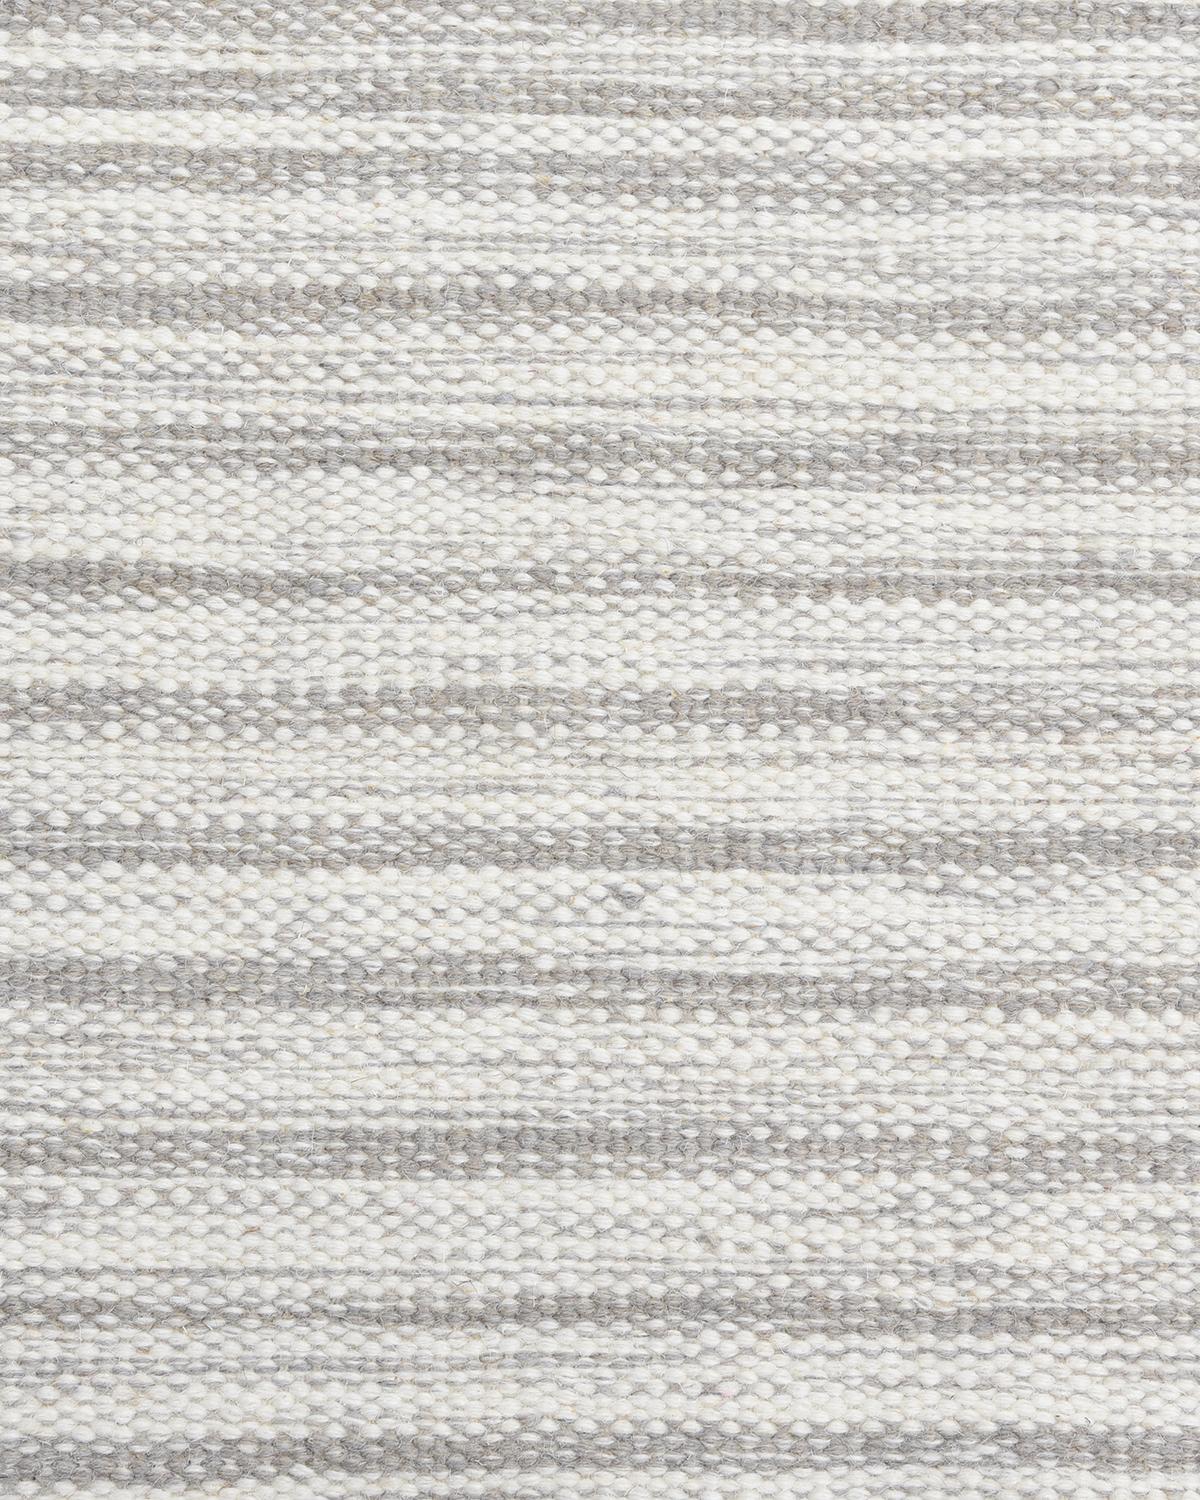 Modern Solo Rugs George Contemporary Striped Handmade Area Rug Light Gray For Sale